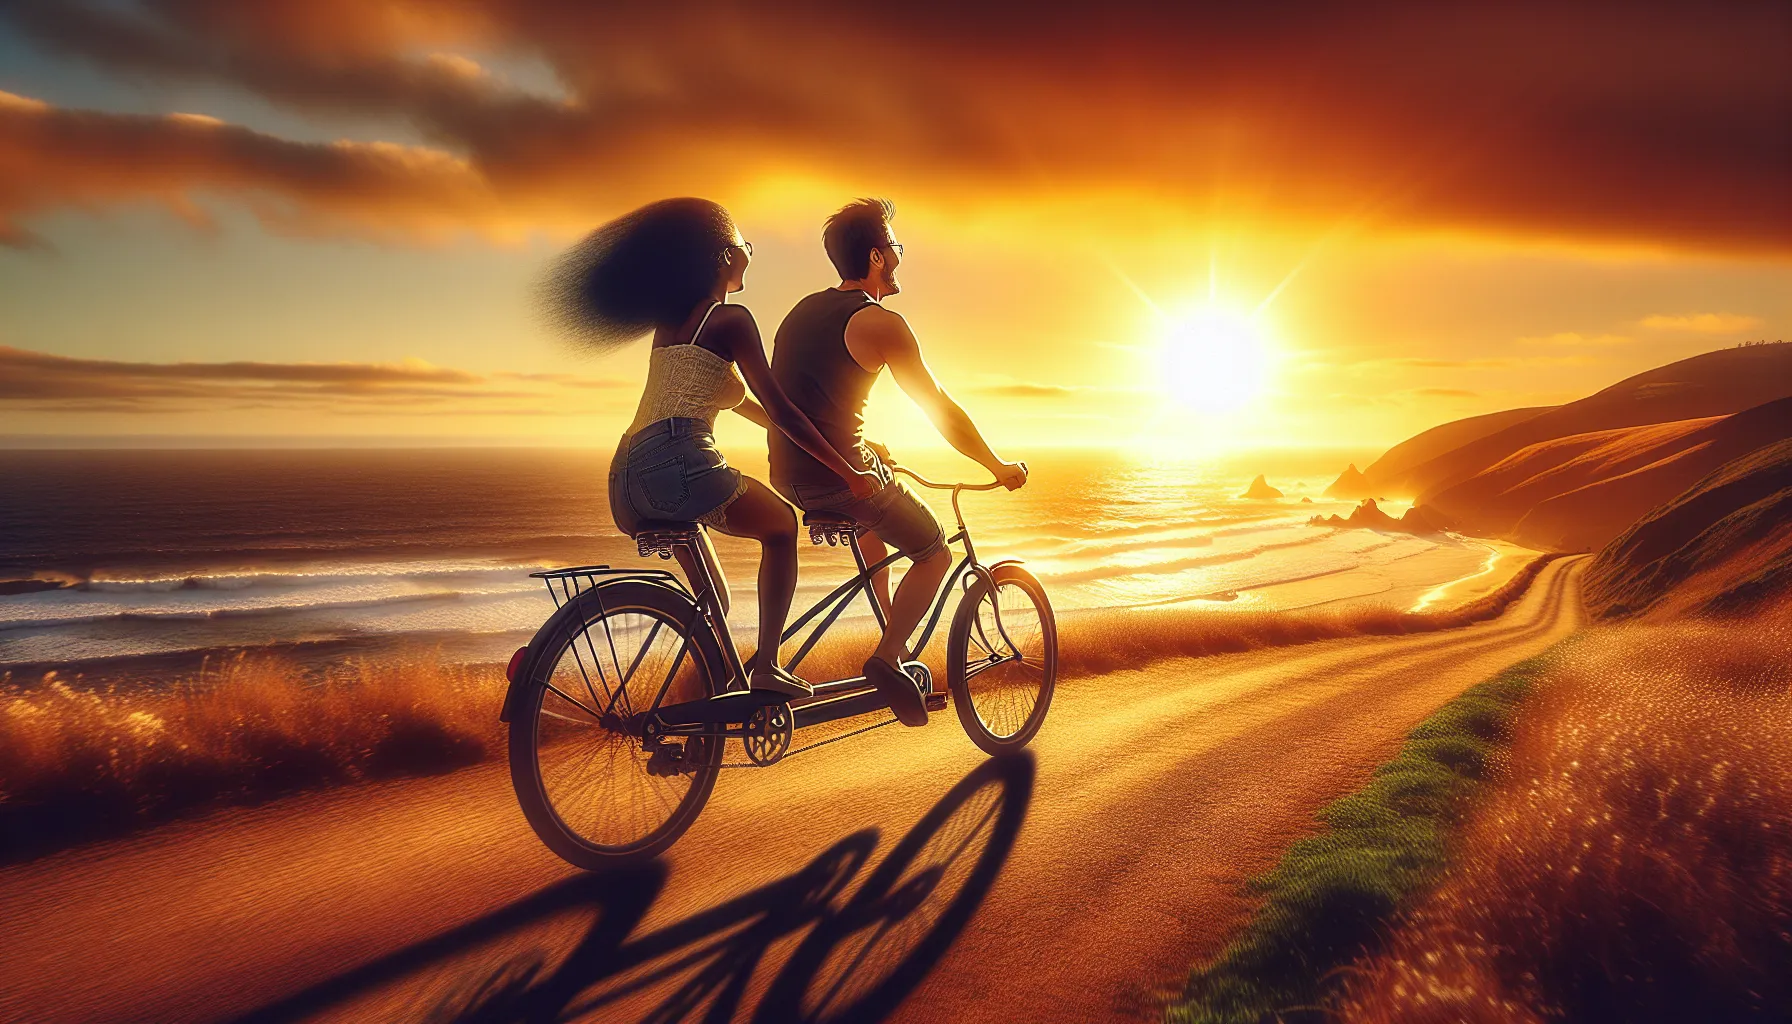 Amidst the rush of the wind and the rhythmic turn of the wheels, a couple finds their tandem biking date not just a journey across the landscape, but through the heart of their romance, pedaling in unison towards shared dreams and sunsets.